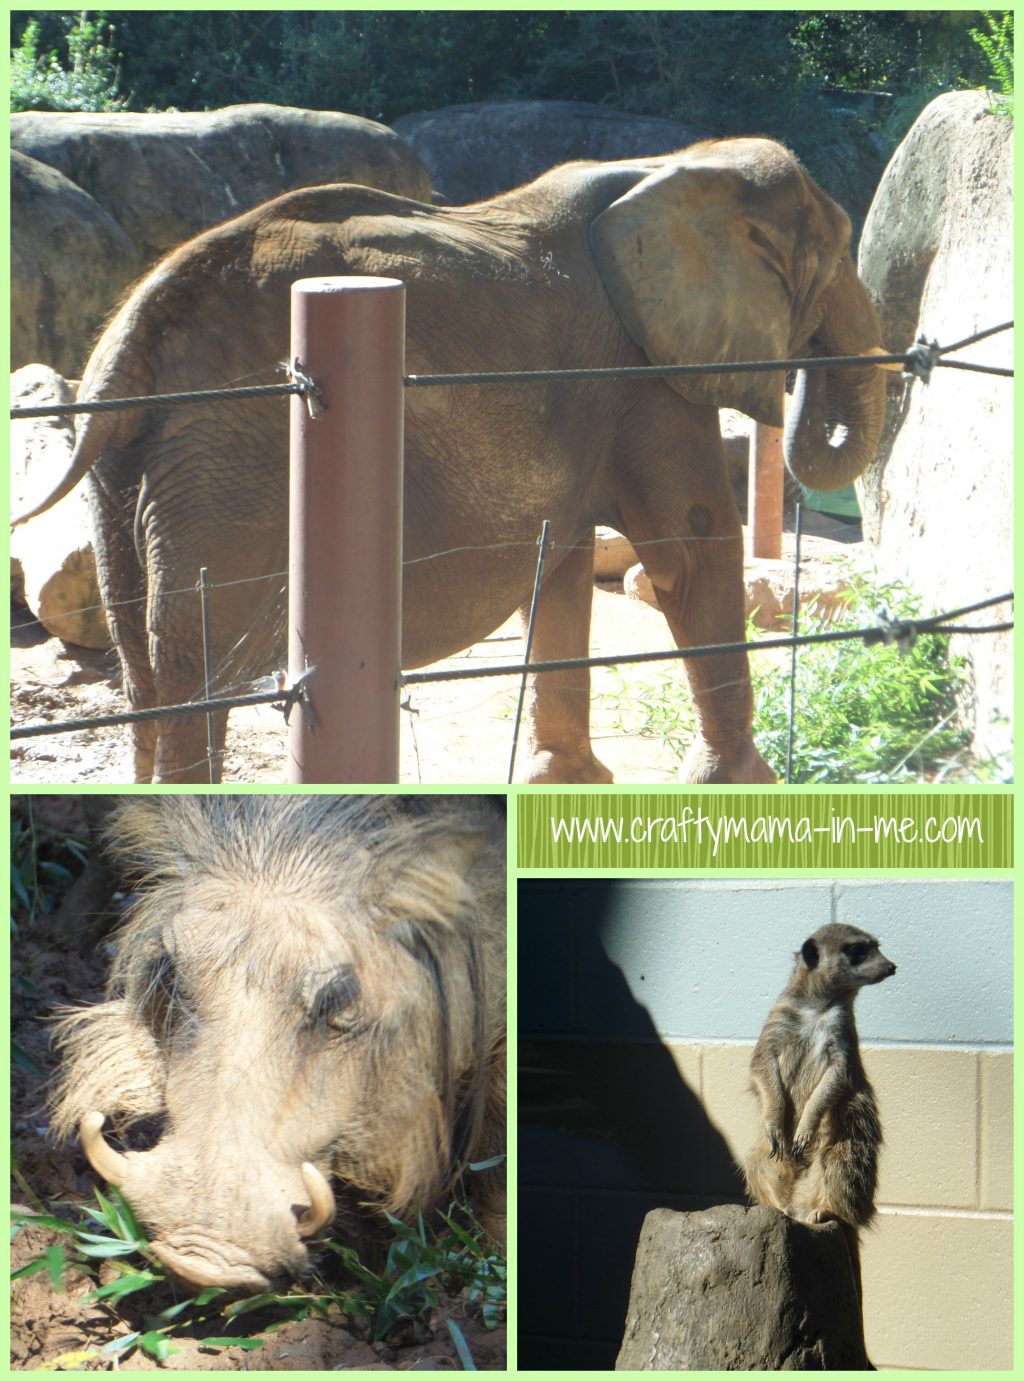 Our Zoo Atlanta Visit and Review